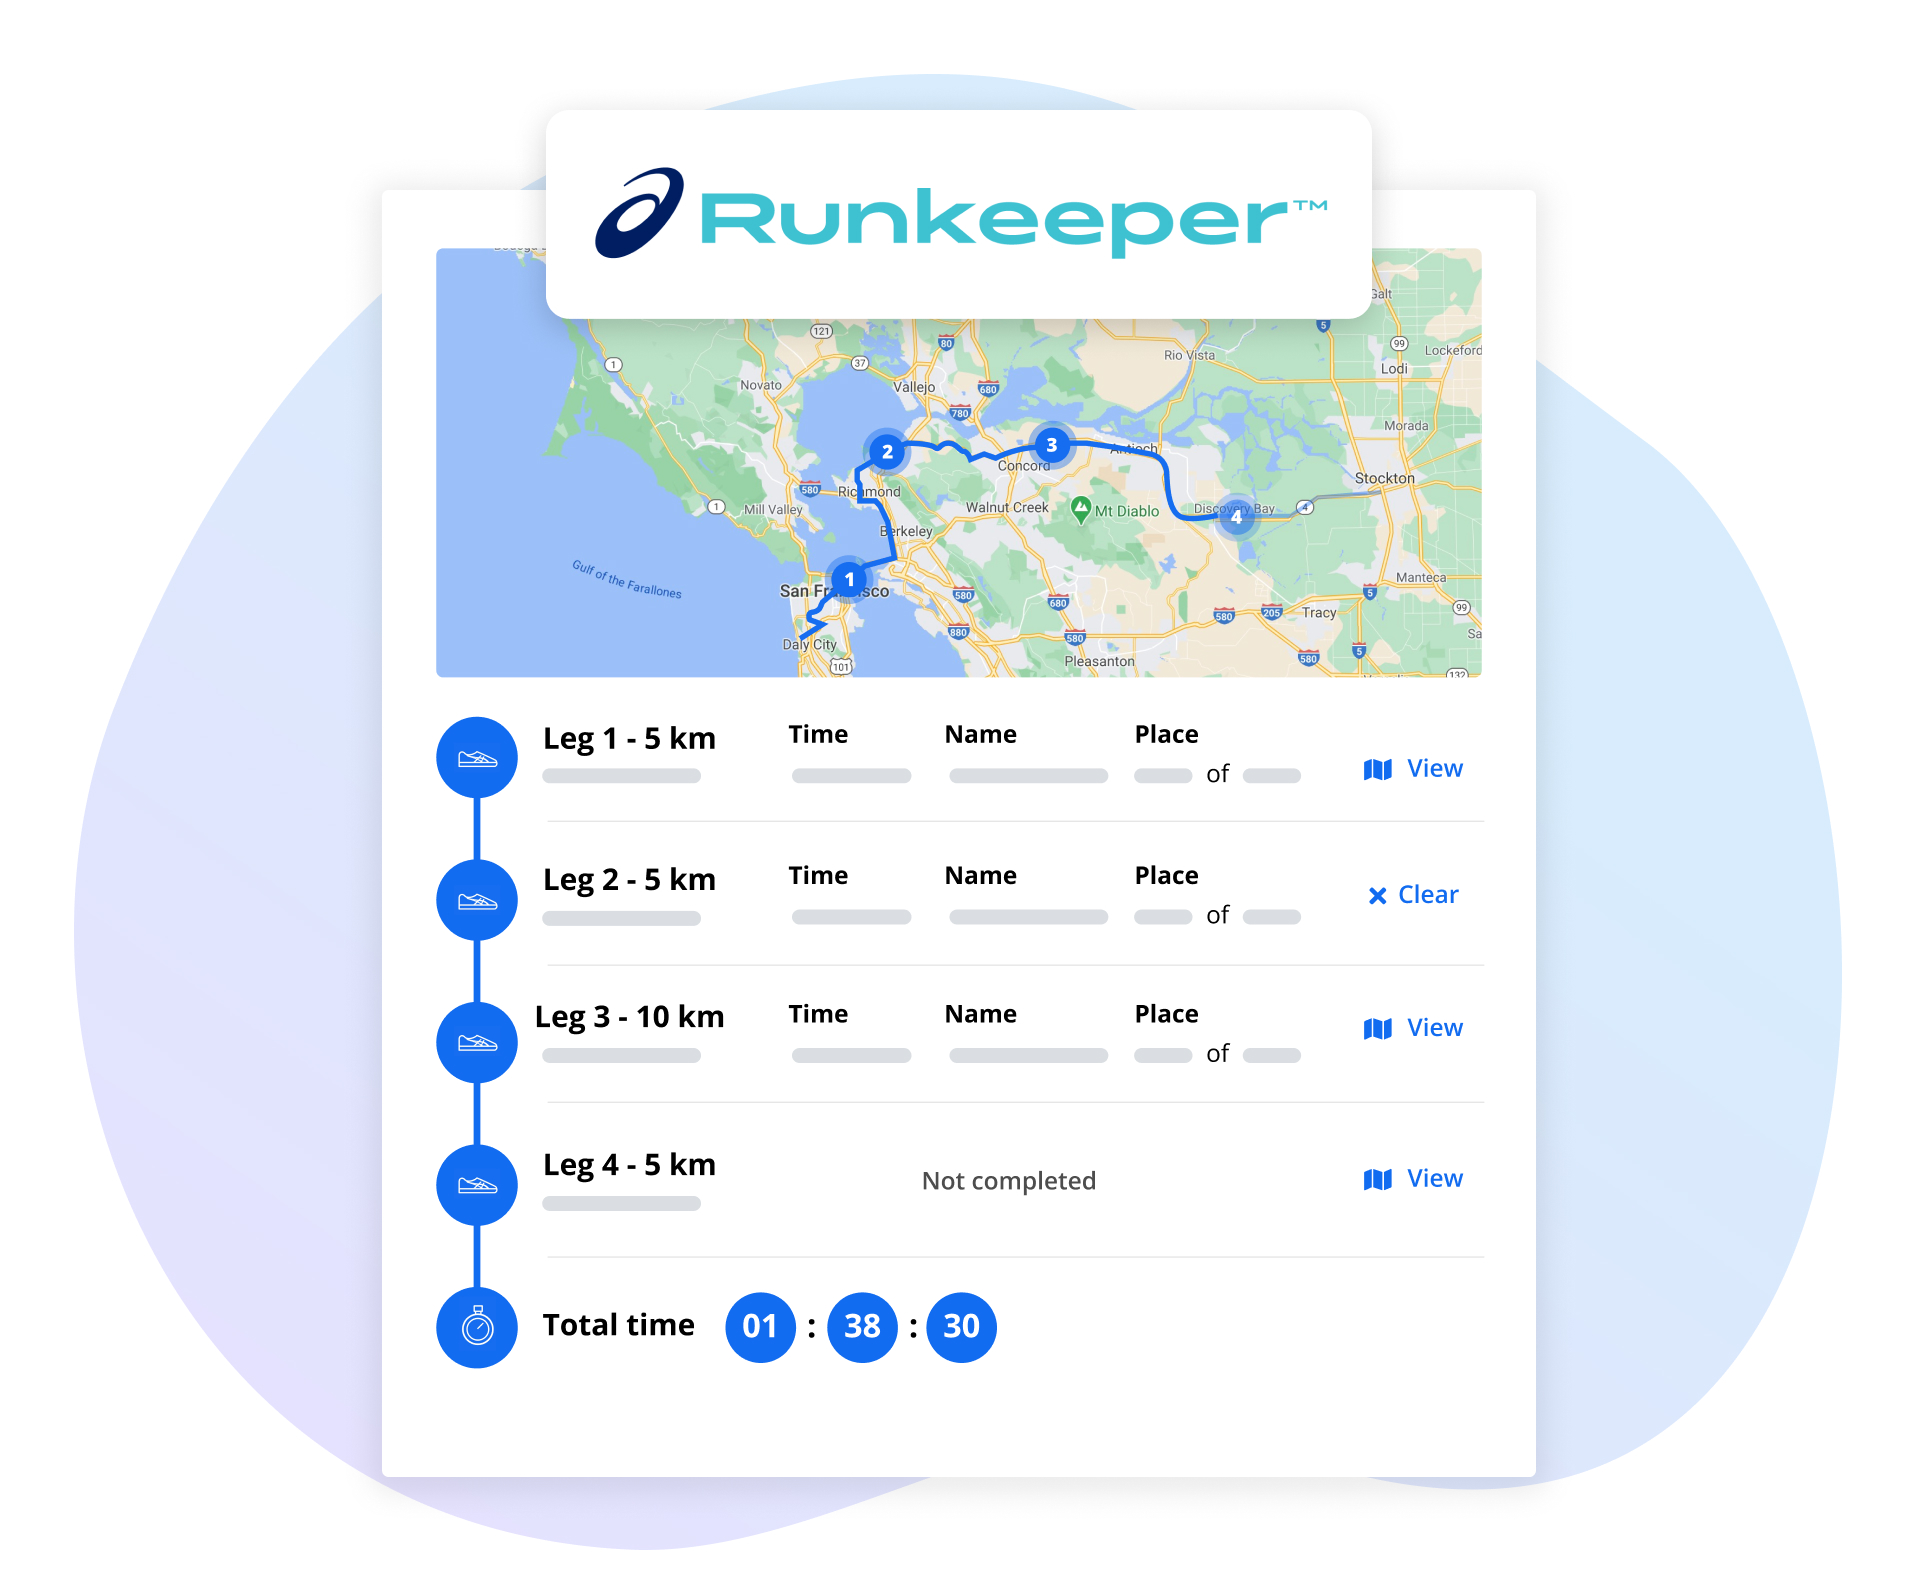 Runkeeper logo and Race Roster activity log